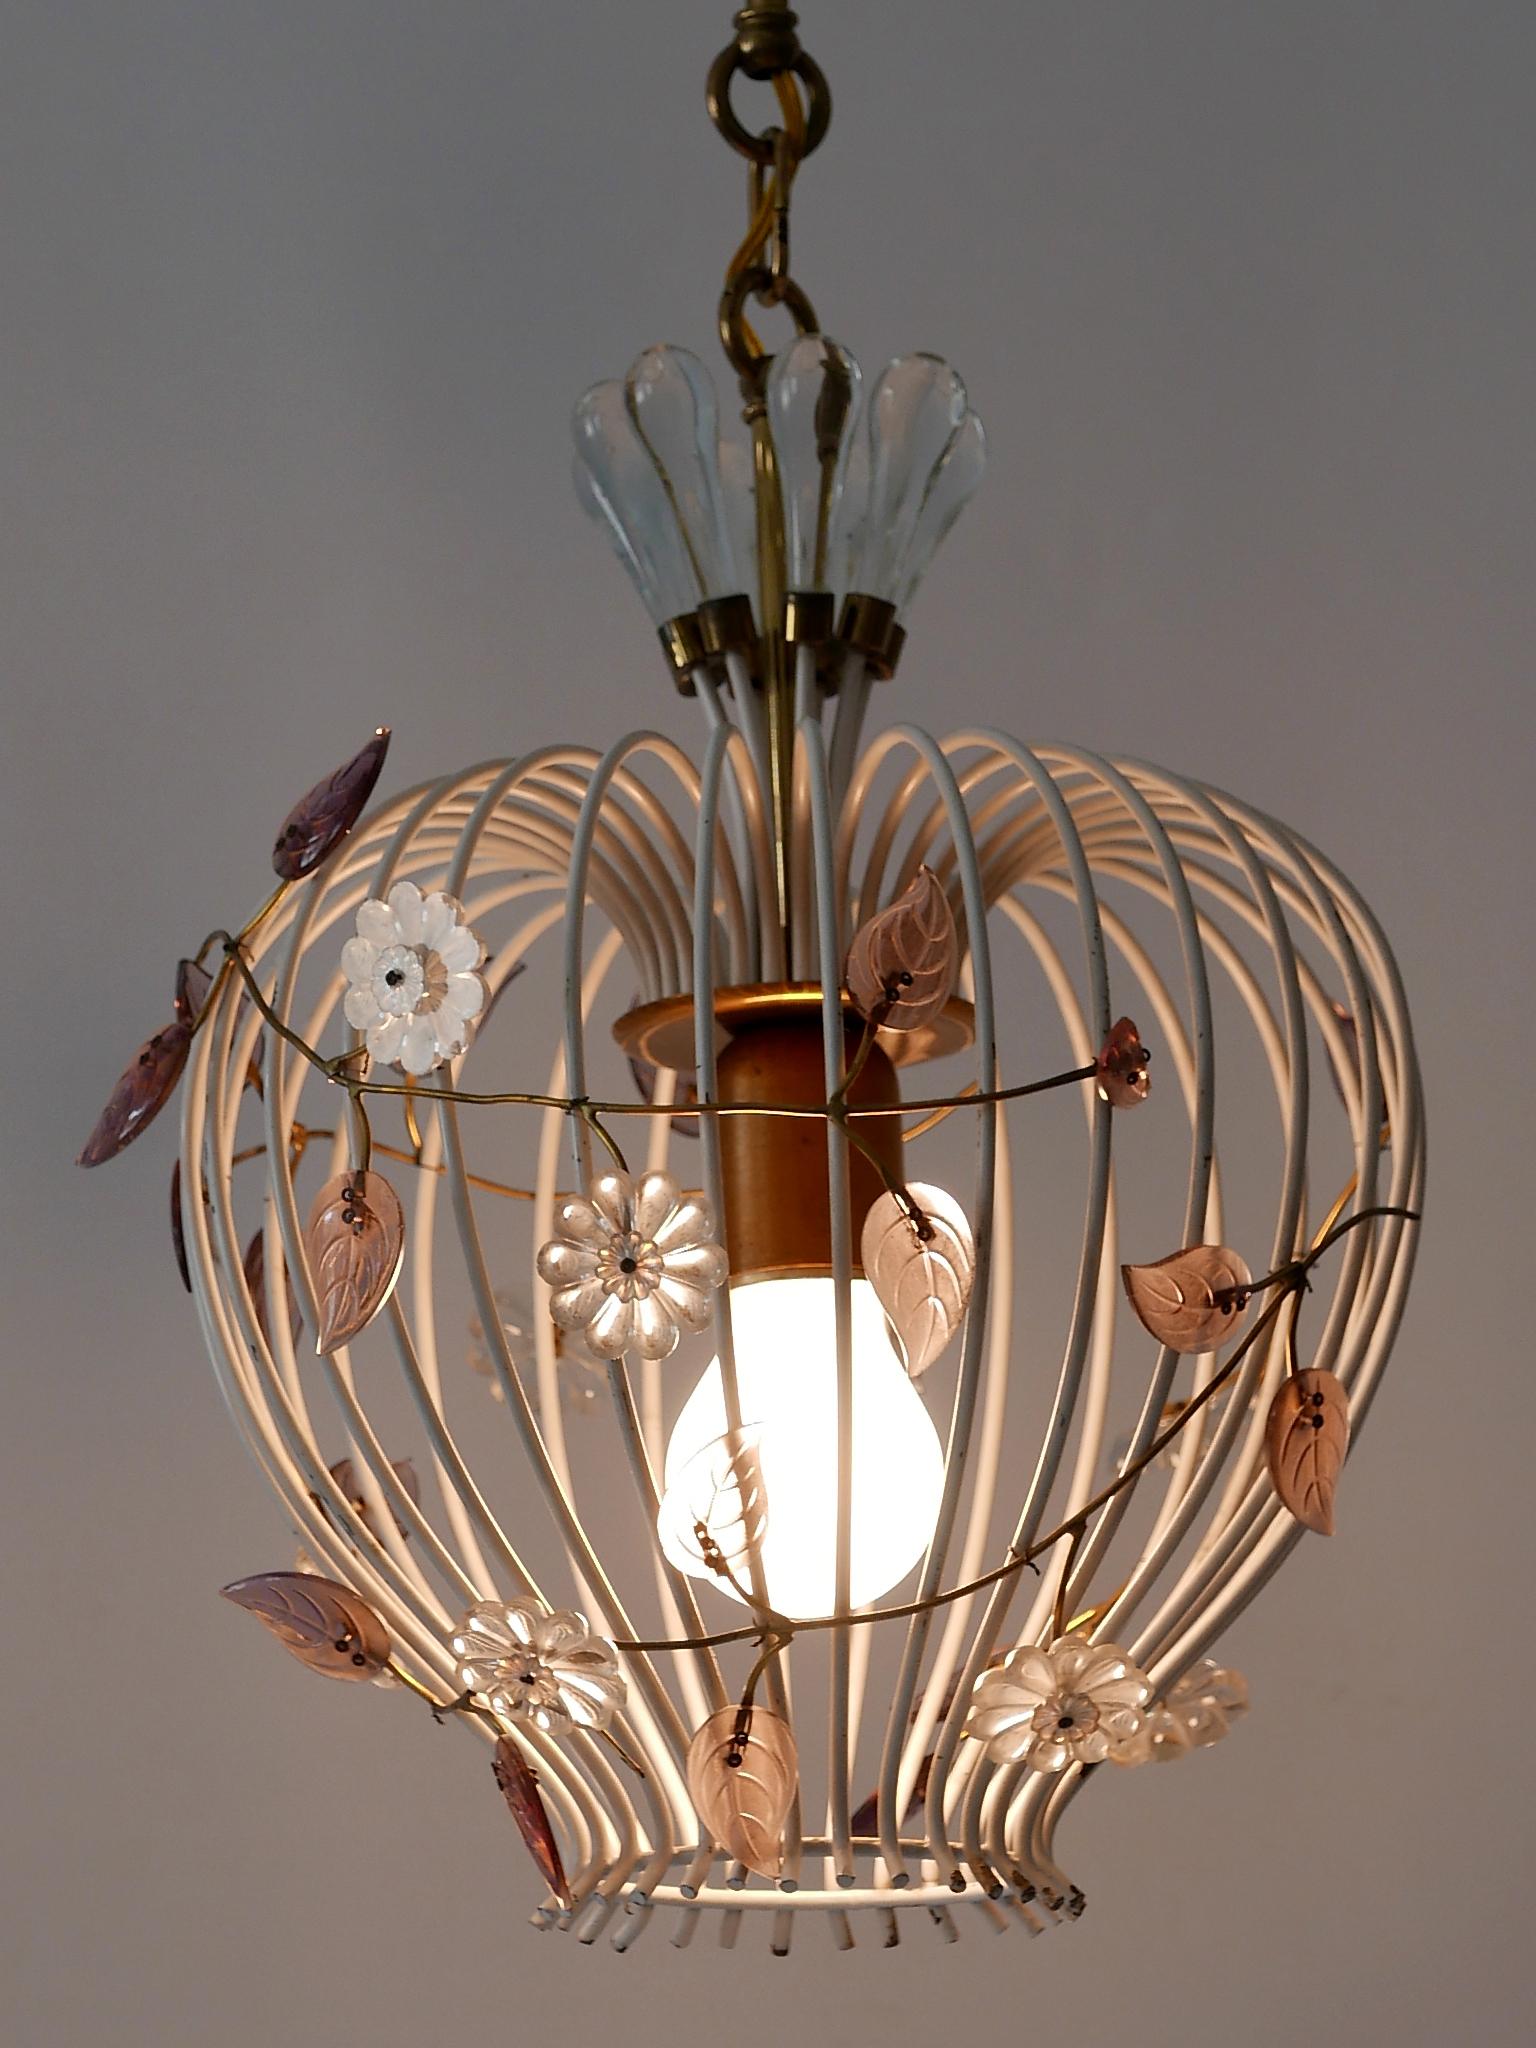 Gorgeous, highly decorative Mid-Century Modern 'Birdcage' pendant lamp or chandelier. Designed & manufactured probably by Vereinigte Werkstätten, Germany, 1950s.

Executed in white color painted metal, brass and glass flowers, the pendant